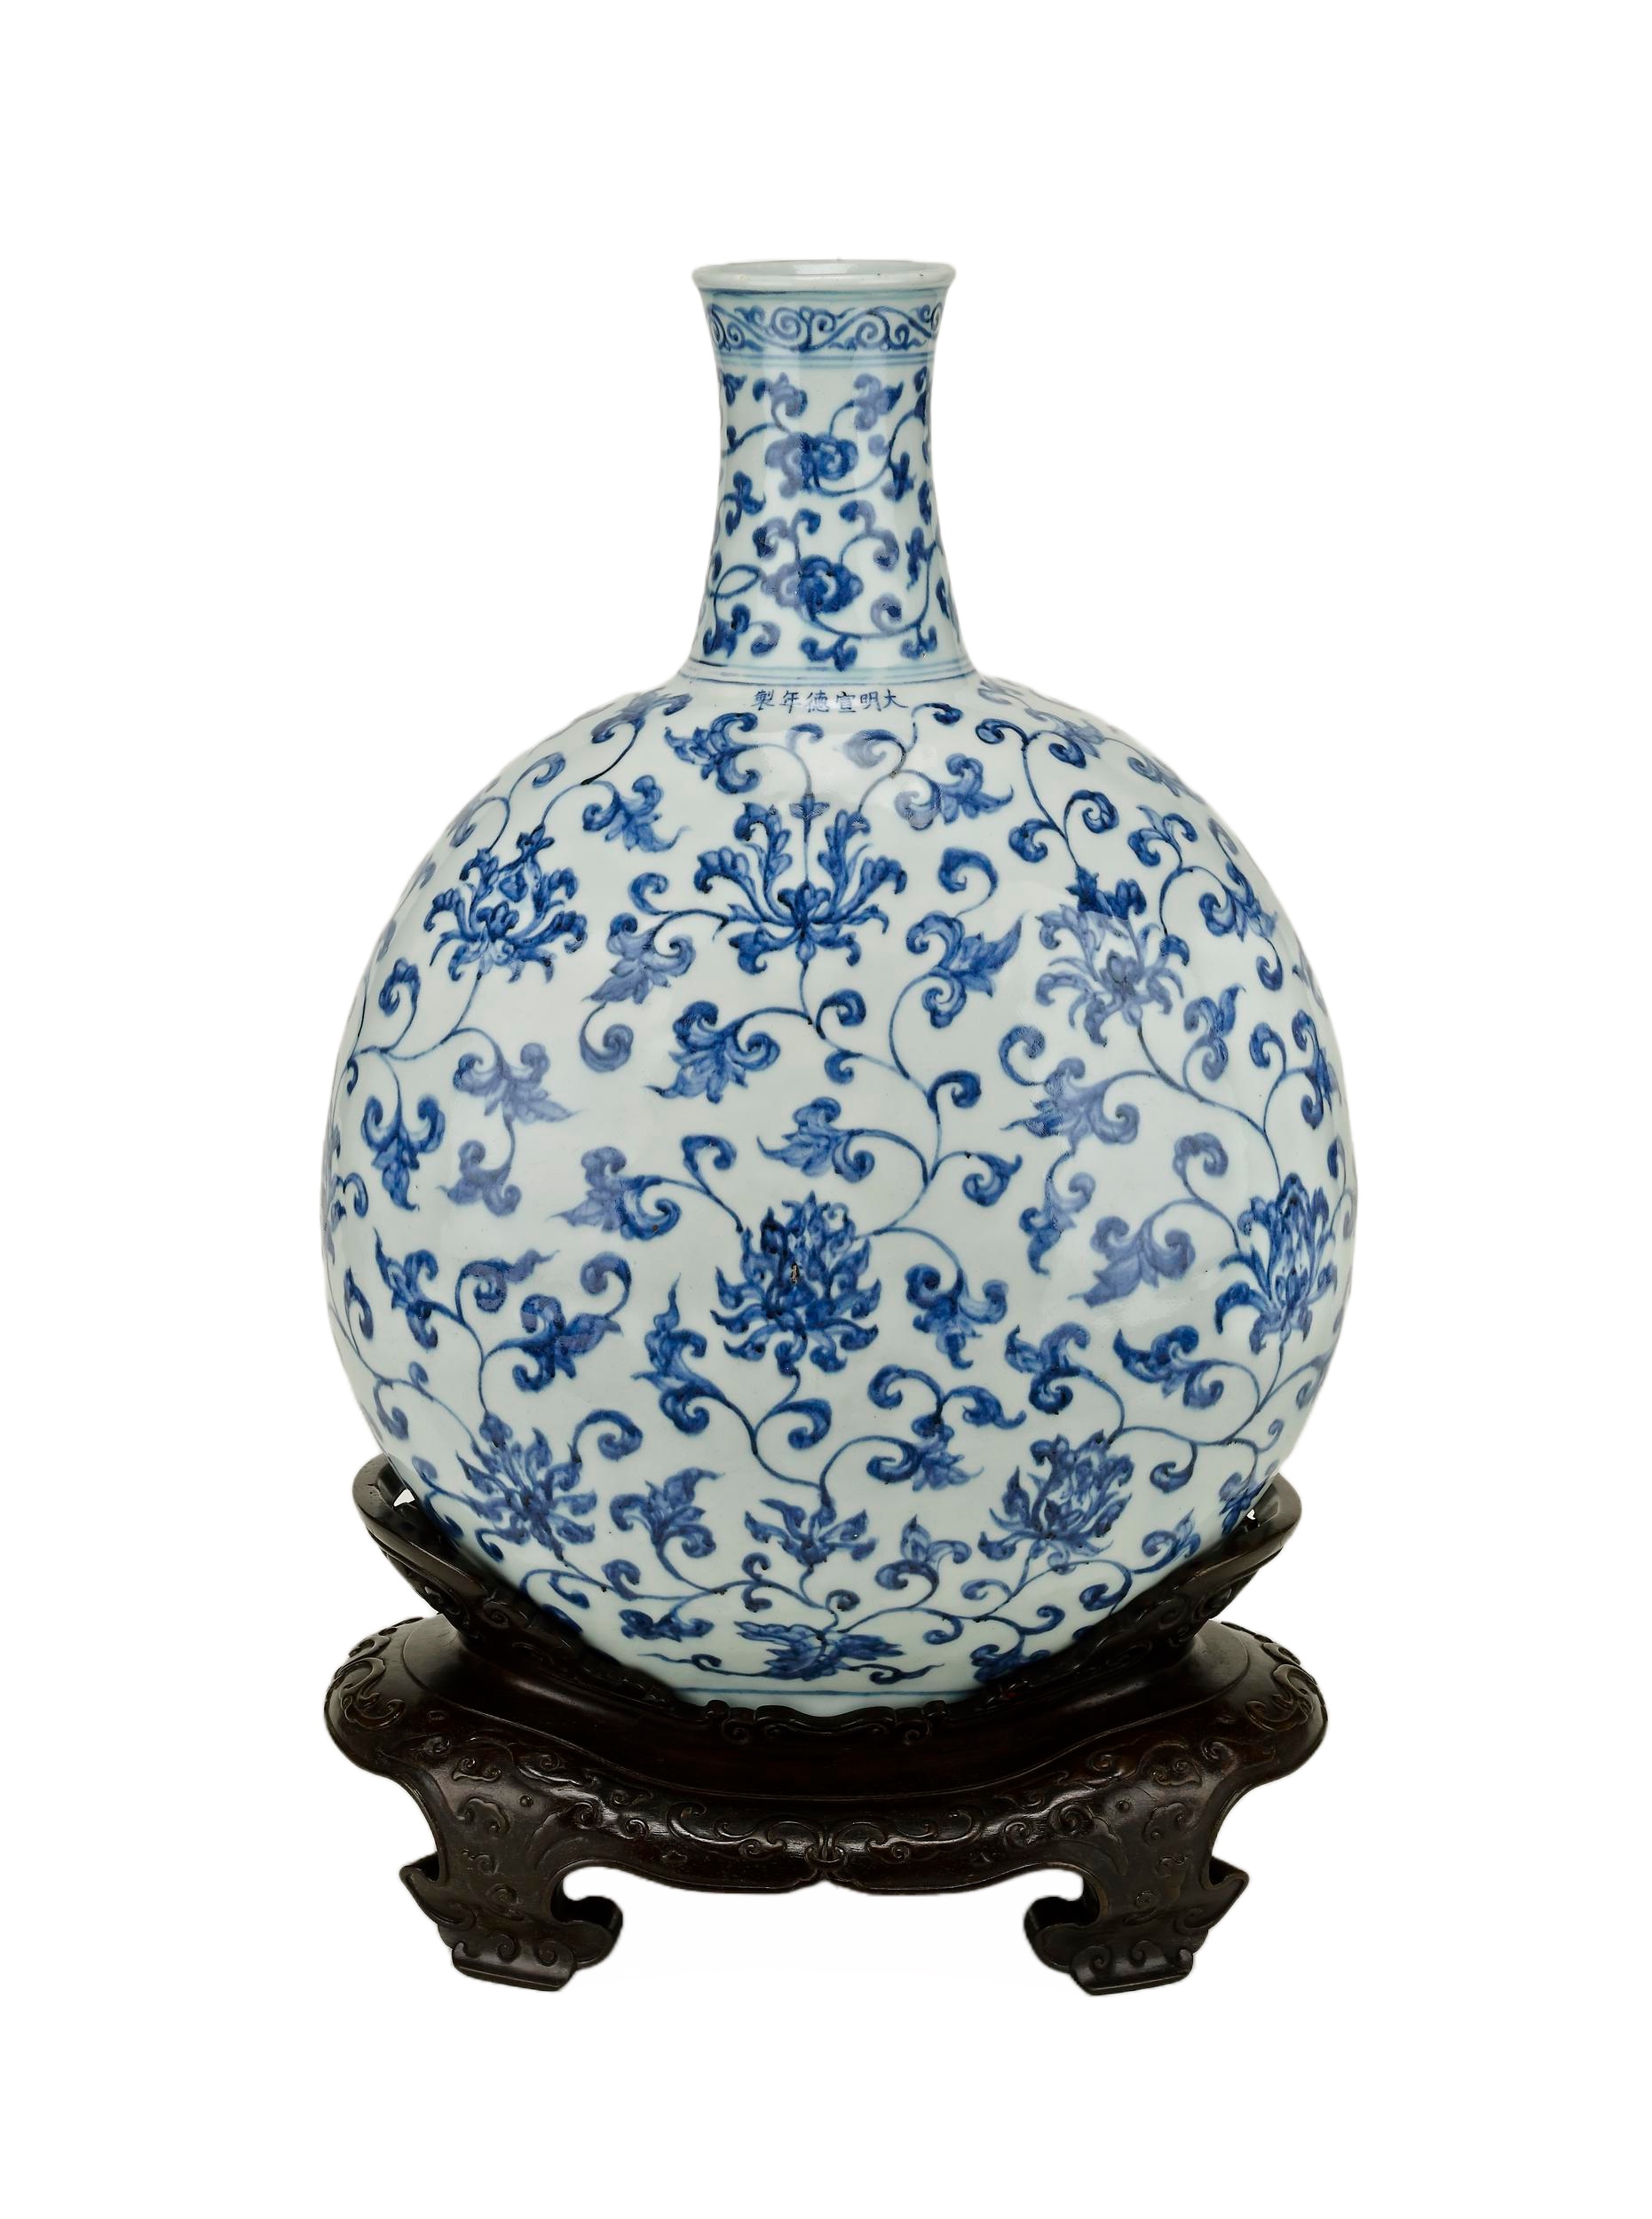 Chinese porcelain: production and export (article)